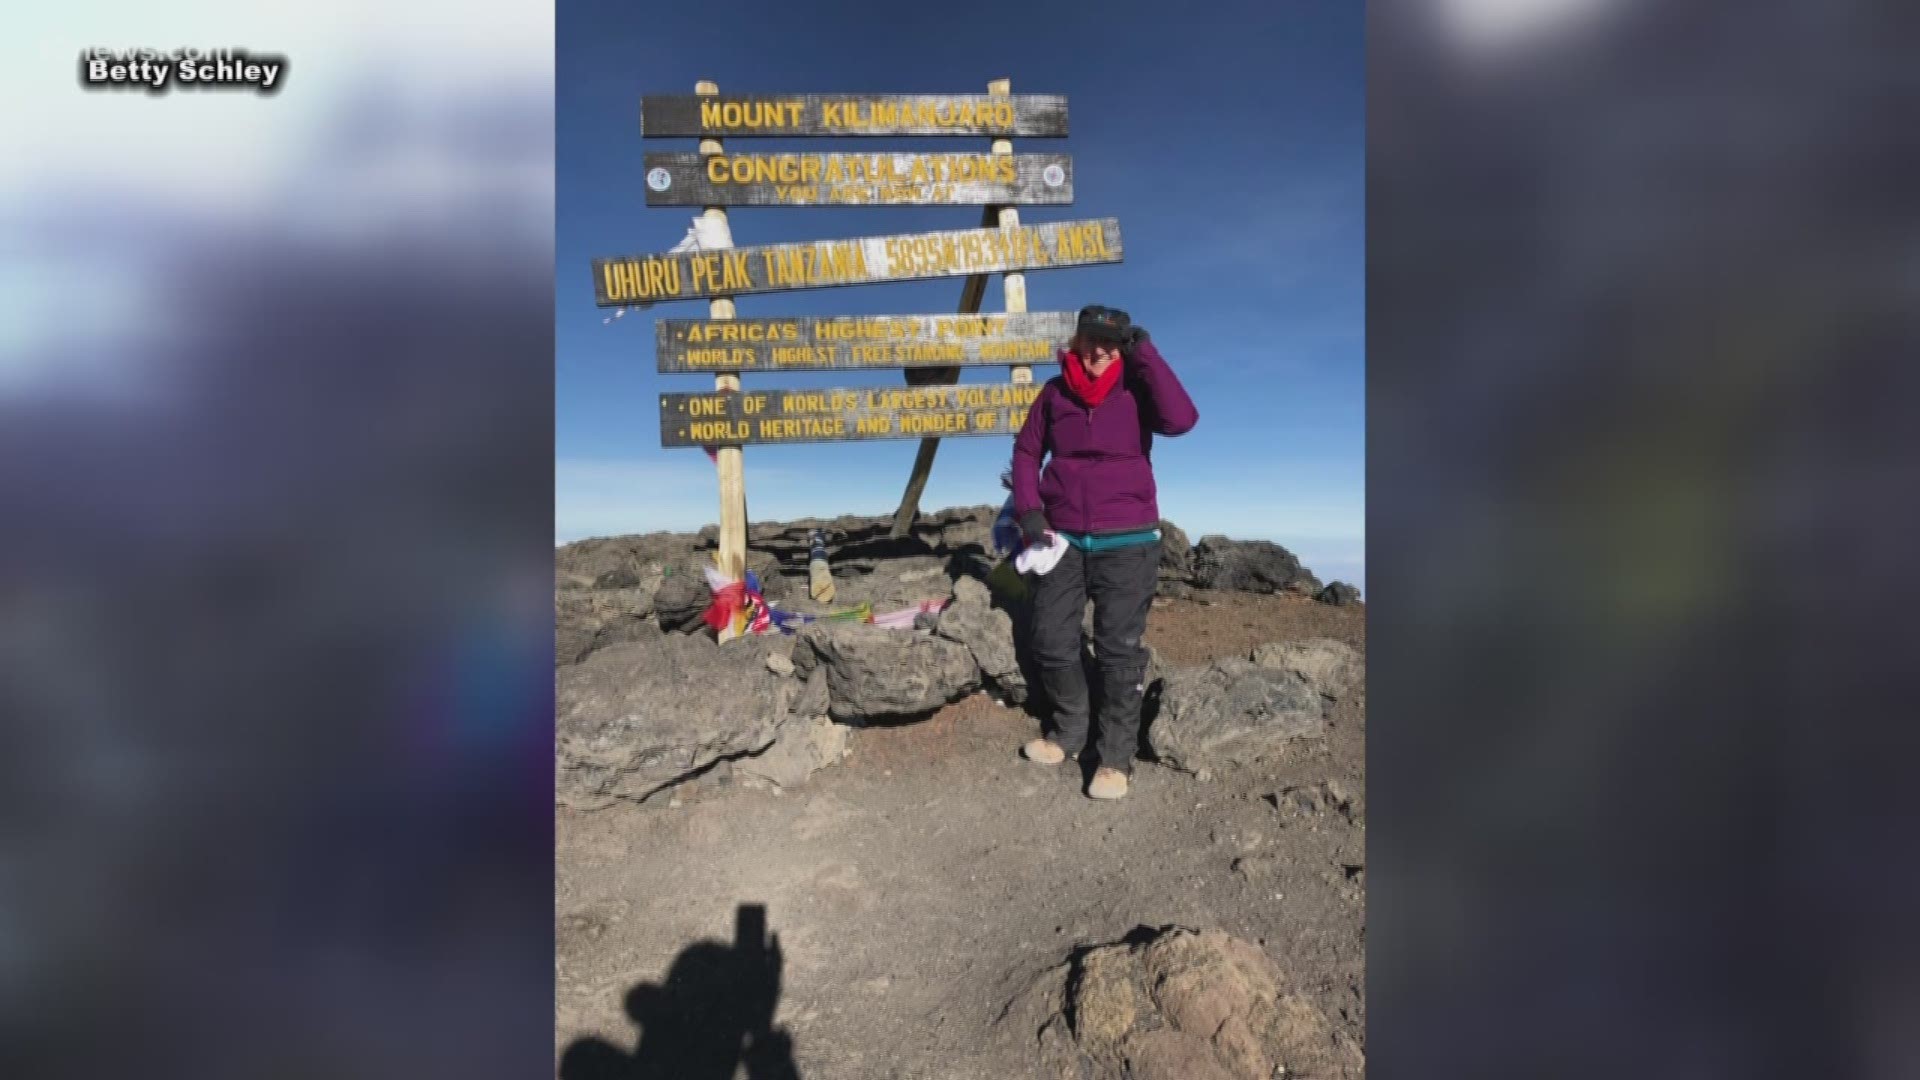 The 73-year-old, full-time pediatric nurse at Banner Thunderbird in Glendale traded in her nursing scrubs for eight days to hike 68 miles on Mount Kilimanjaro in Tanzania.